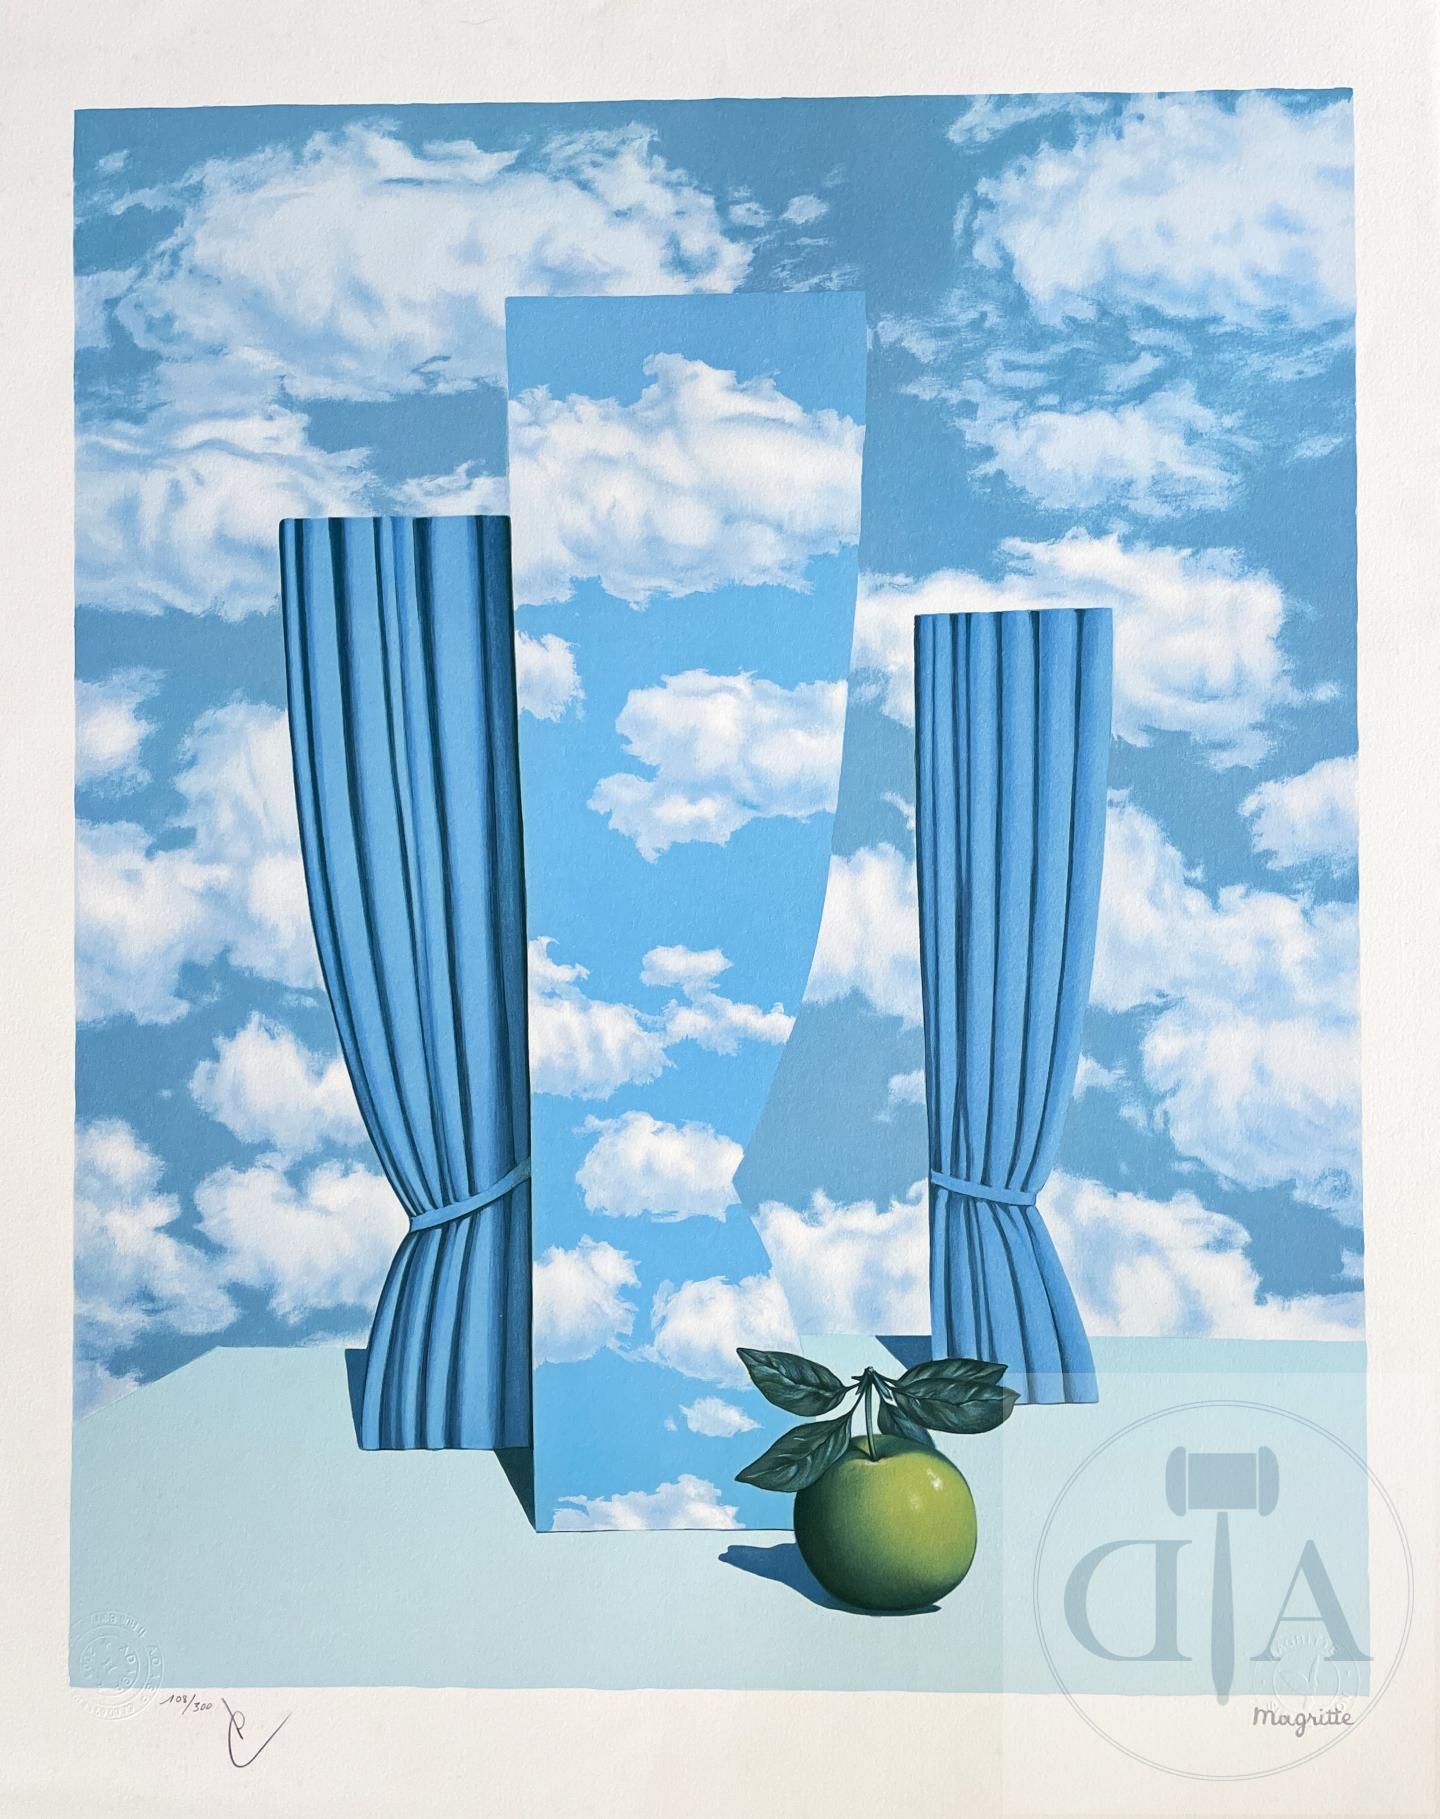 Null Magritte/Lithograph "Le beau monde" edited in 2007 with stamp "succession M&hellip;